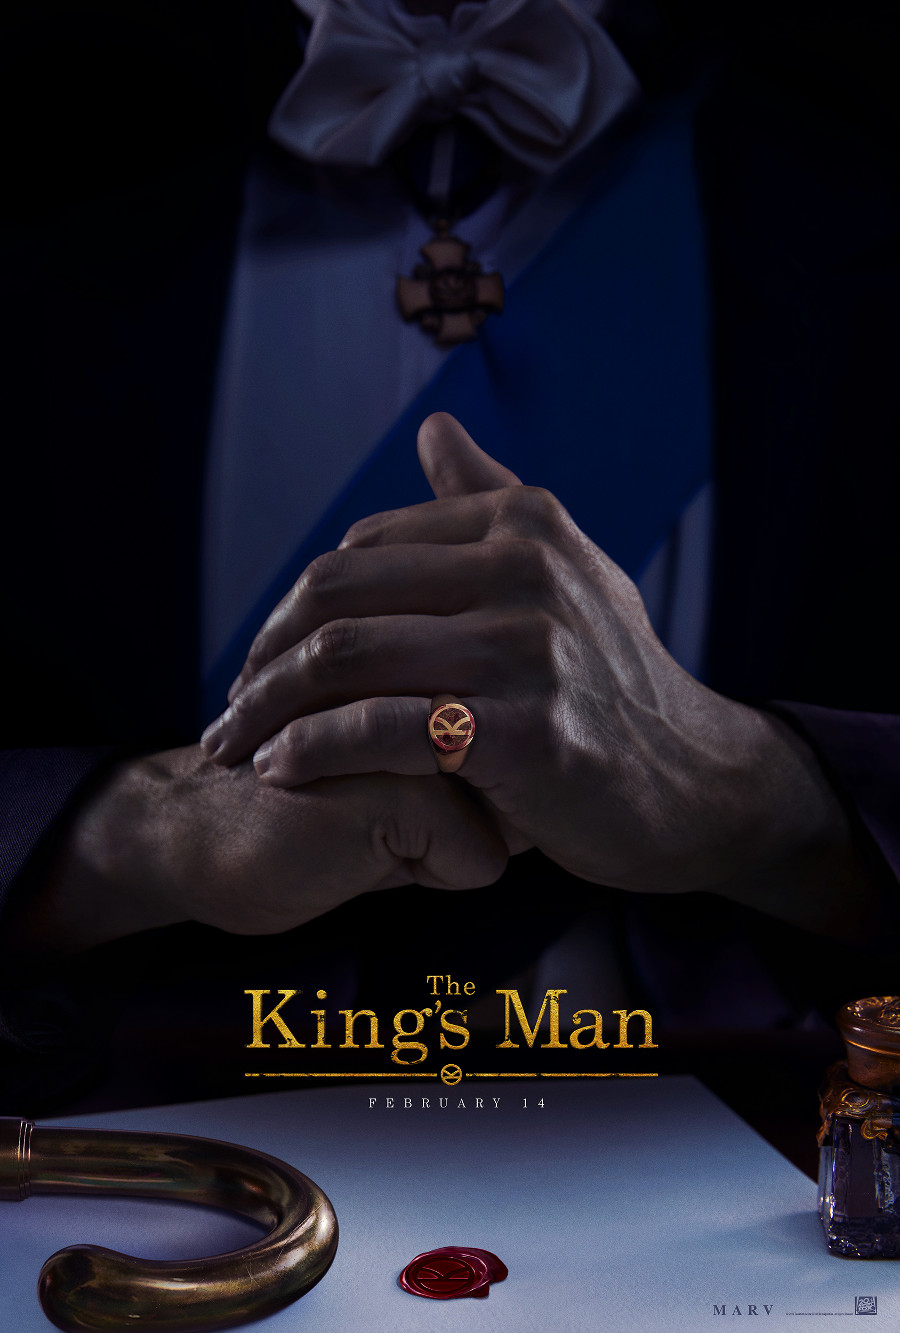 The King’s Man posters